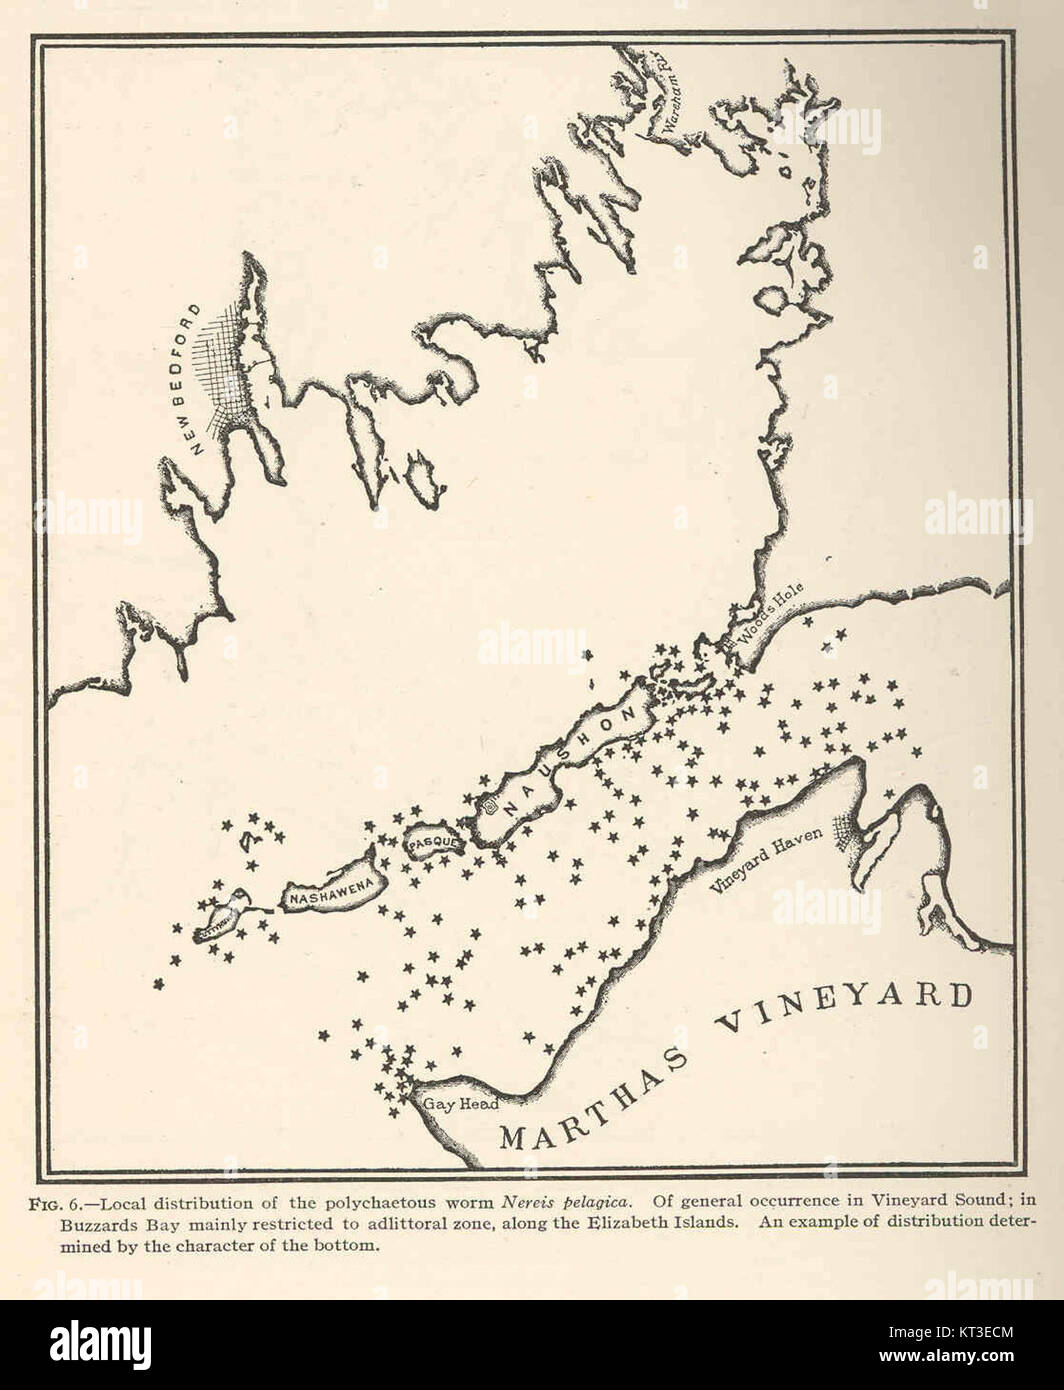 42294 Local distribution of the polychaetous worm Nereis pelagica Of general occurrence in Vineyard Sound; in Buzzards Bay mainly Stock Photo